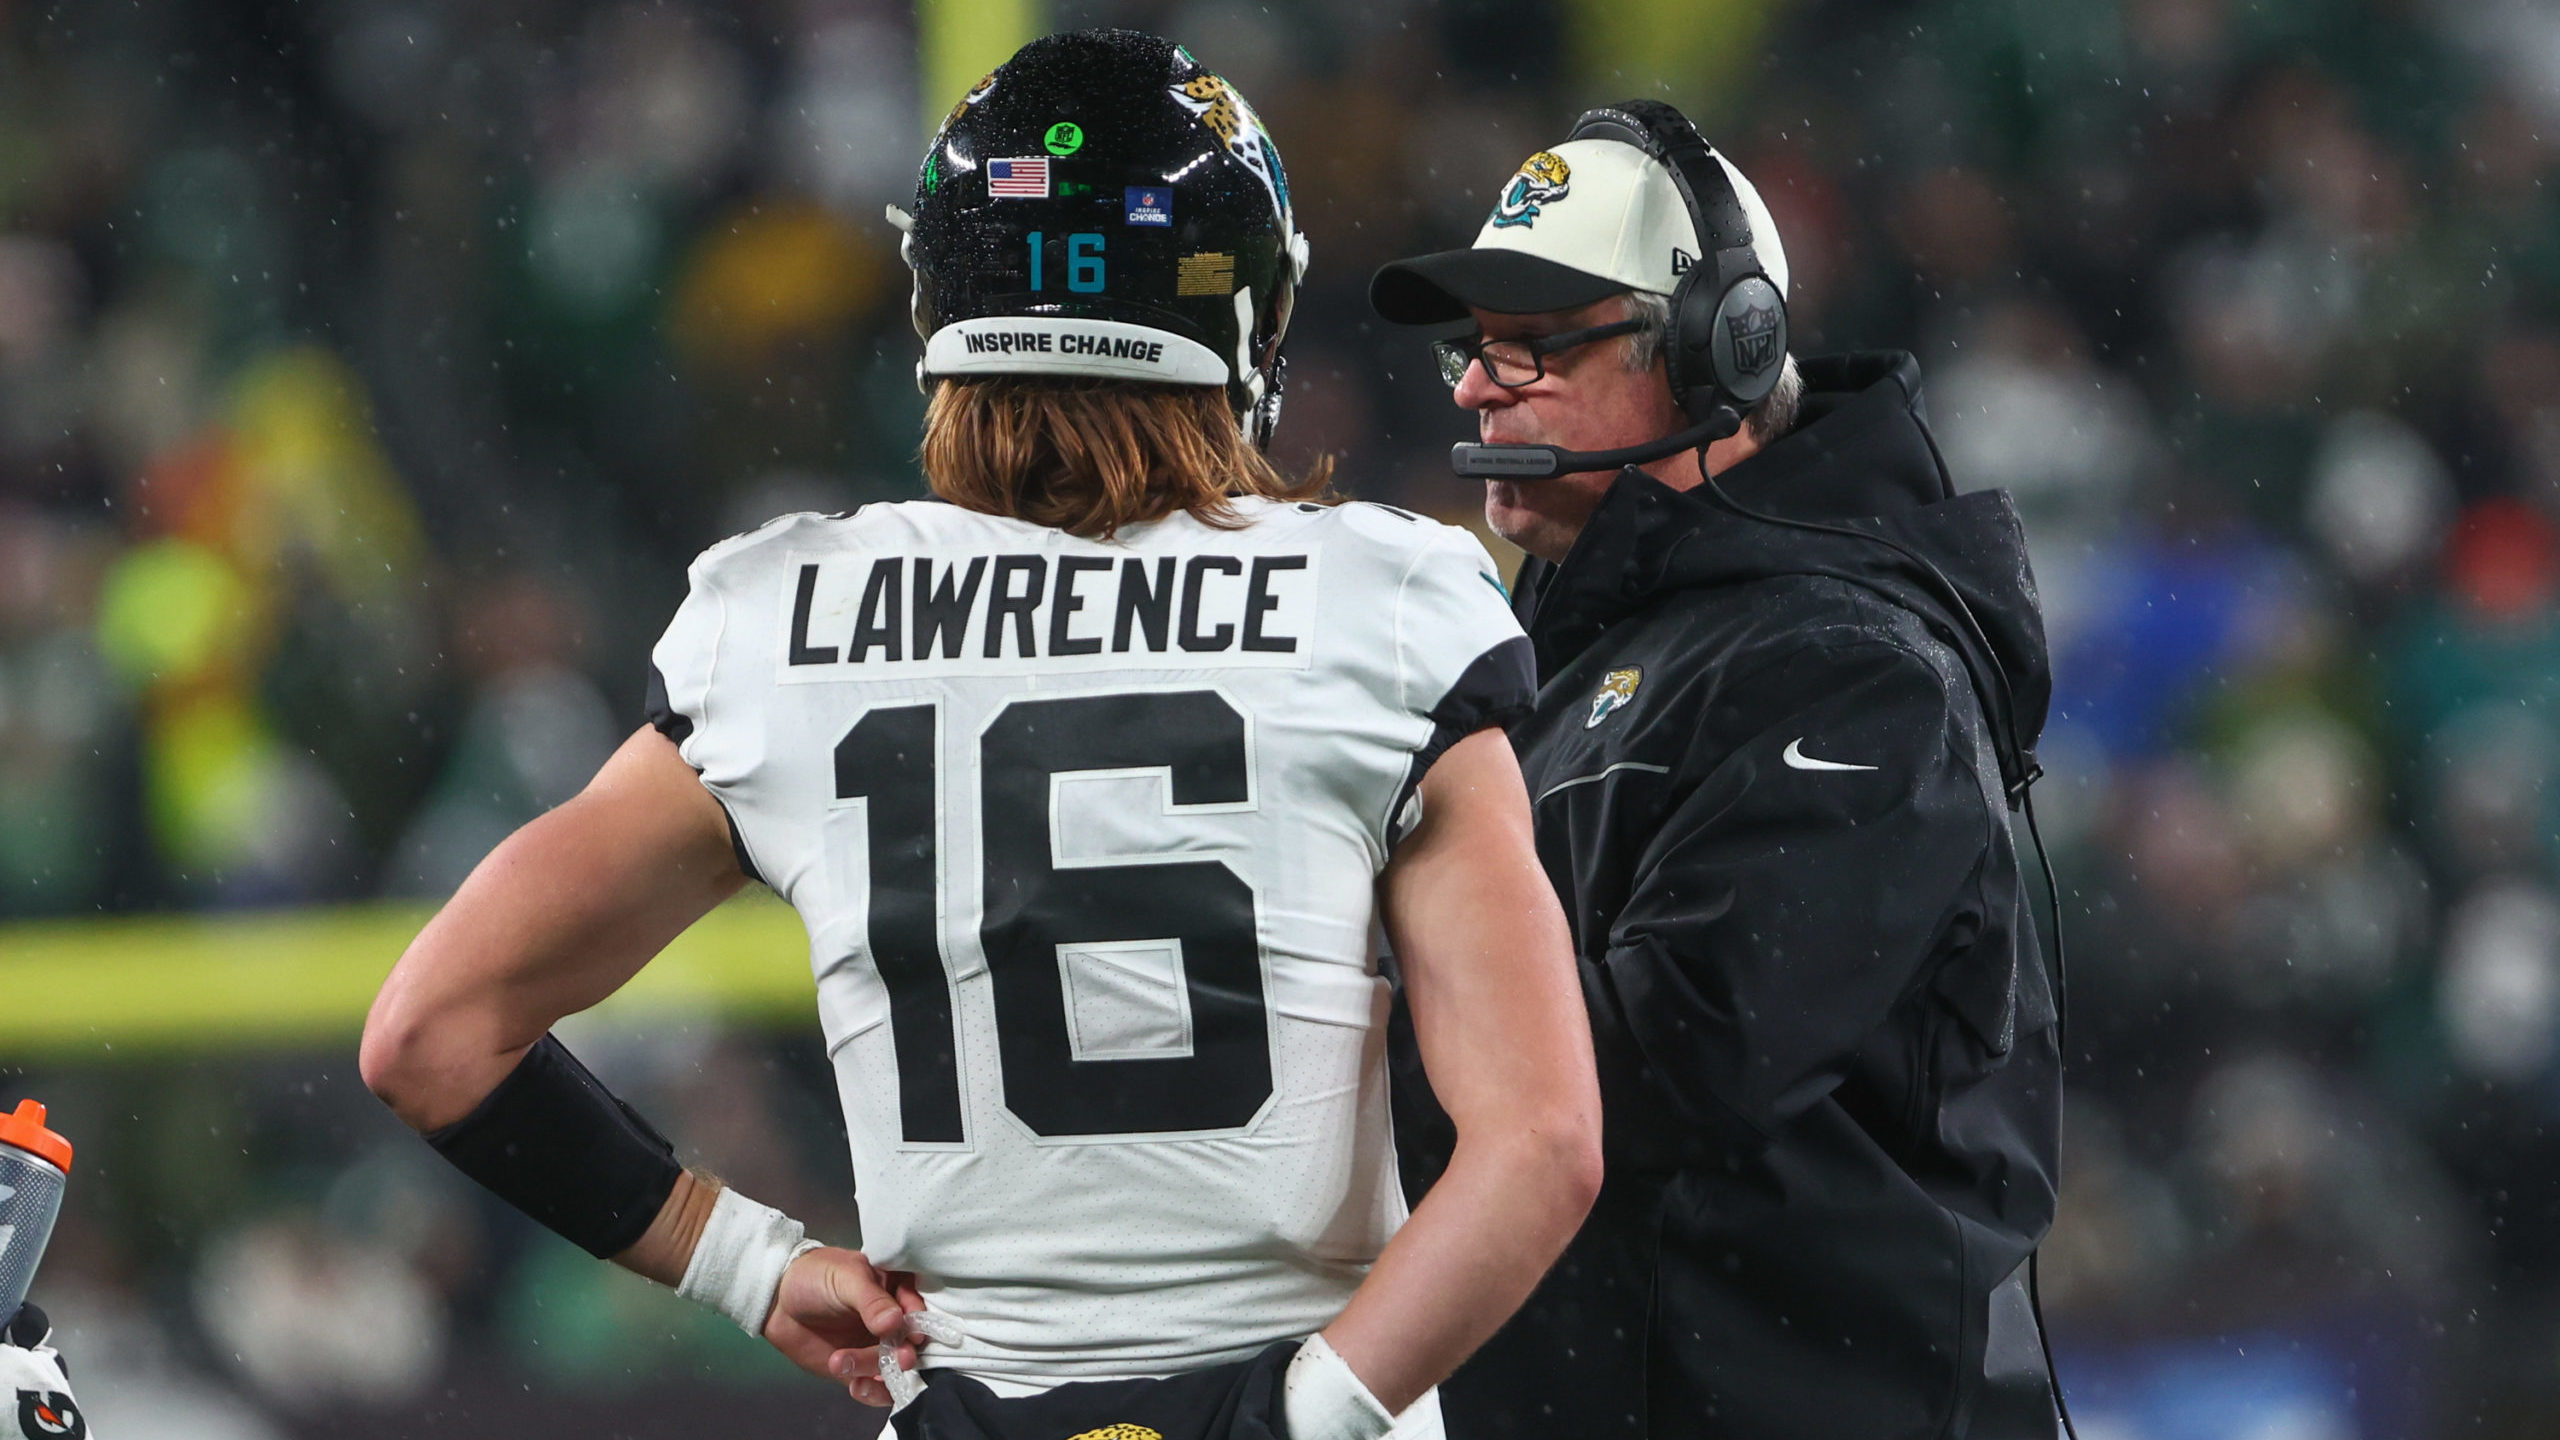 Pederson’s Super Bowl Experience Helped Jaguars, Lawrence vs. Chargers